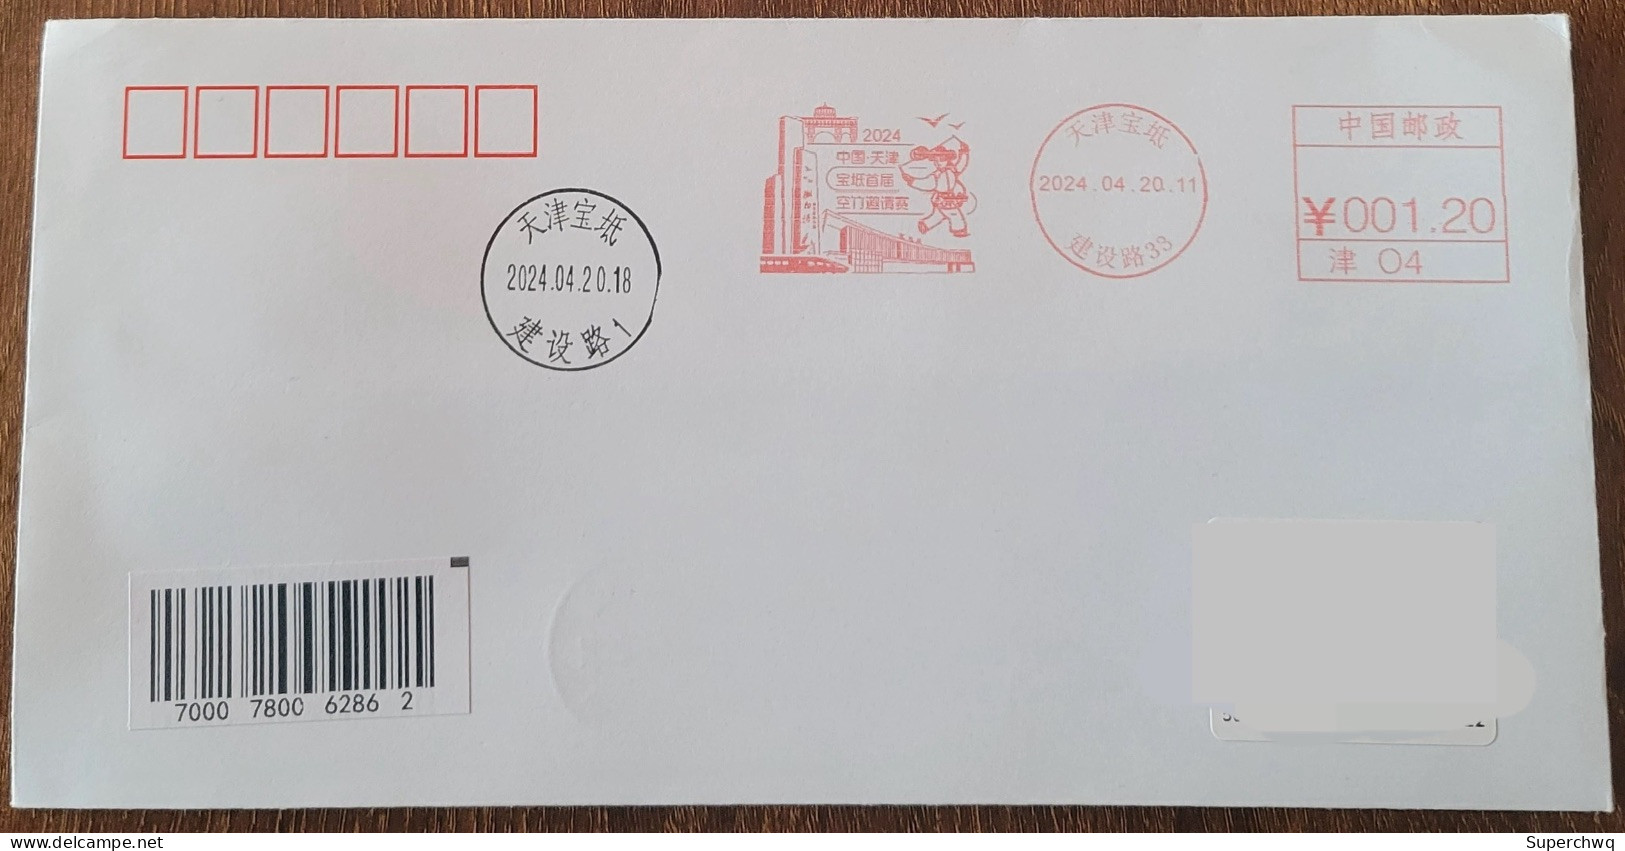 China Cover The First Tianjin Baodi Diabolo Invitational (Tianjin) Was Stamped With Postage On The First Day Of Actual D - Postales